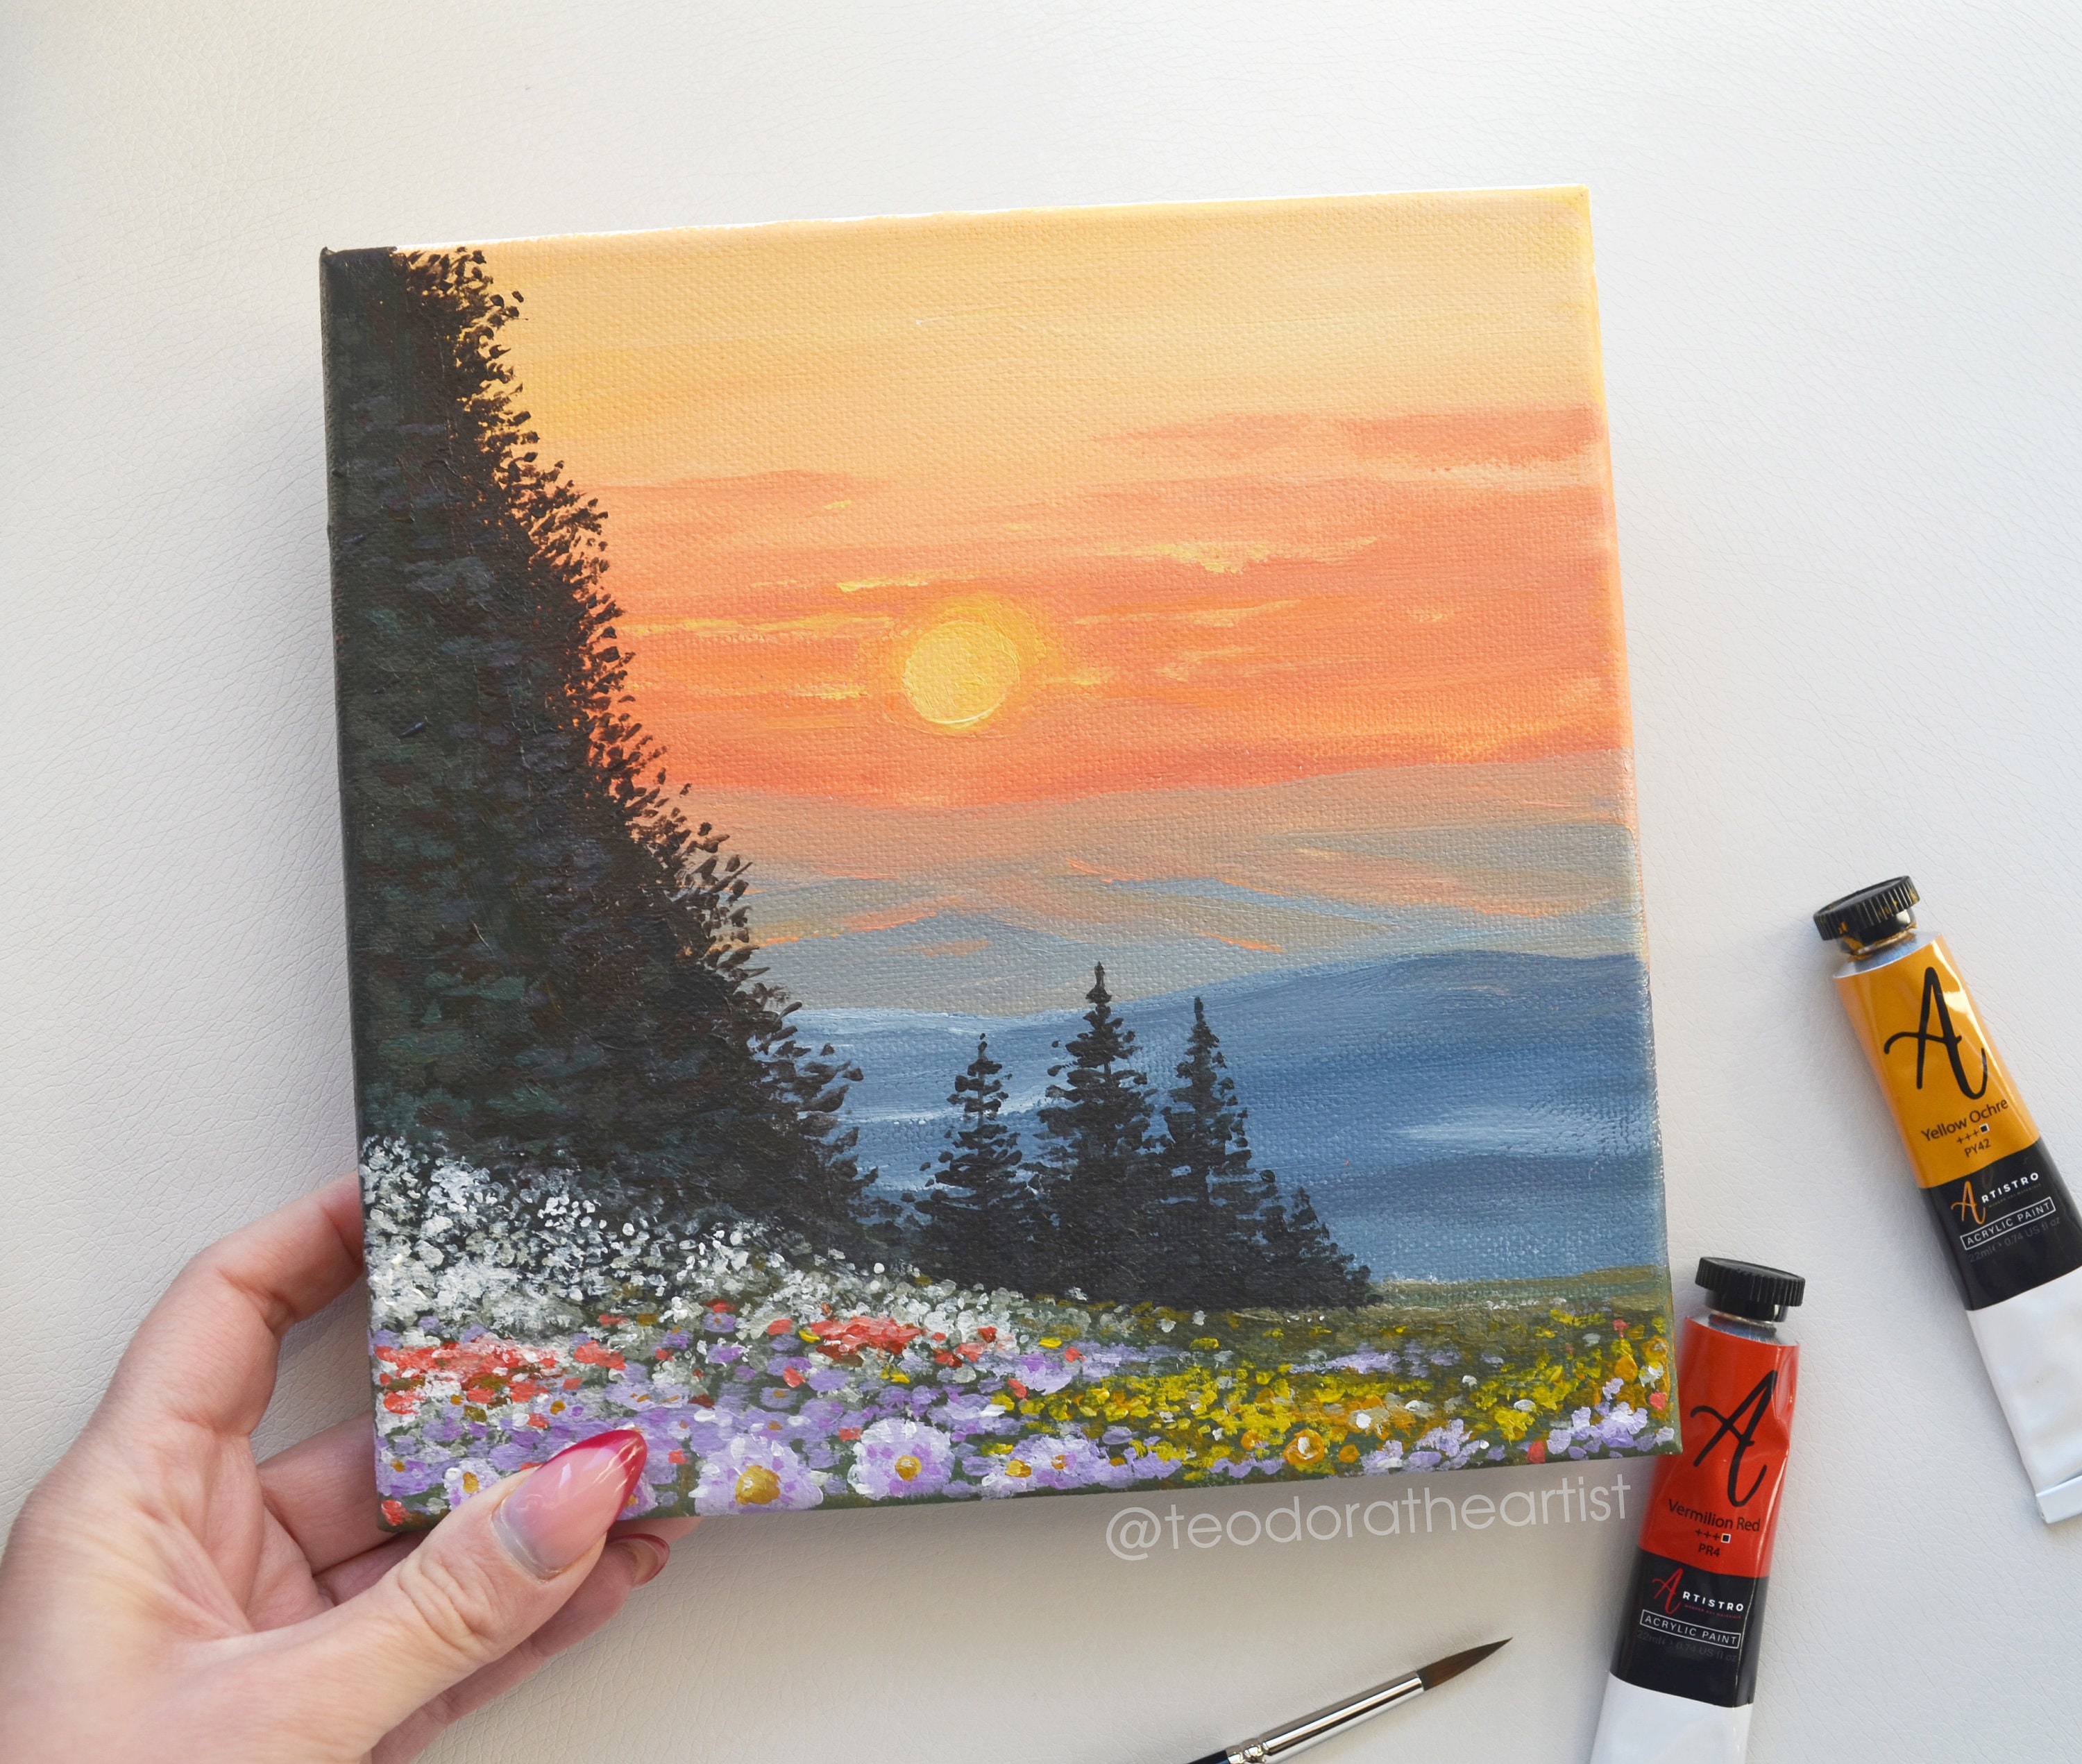 Original Acrylic Painting on Small Canvas Colorful Landscape Wall Art  Sunset Mountain, Pine Trees, Spring Flowers Aesthetic Room Decor -   Finland